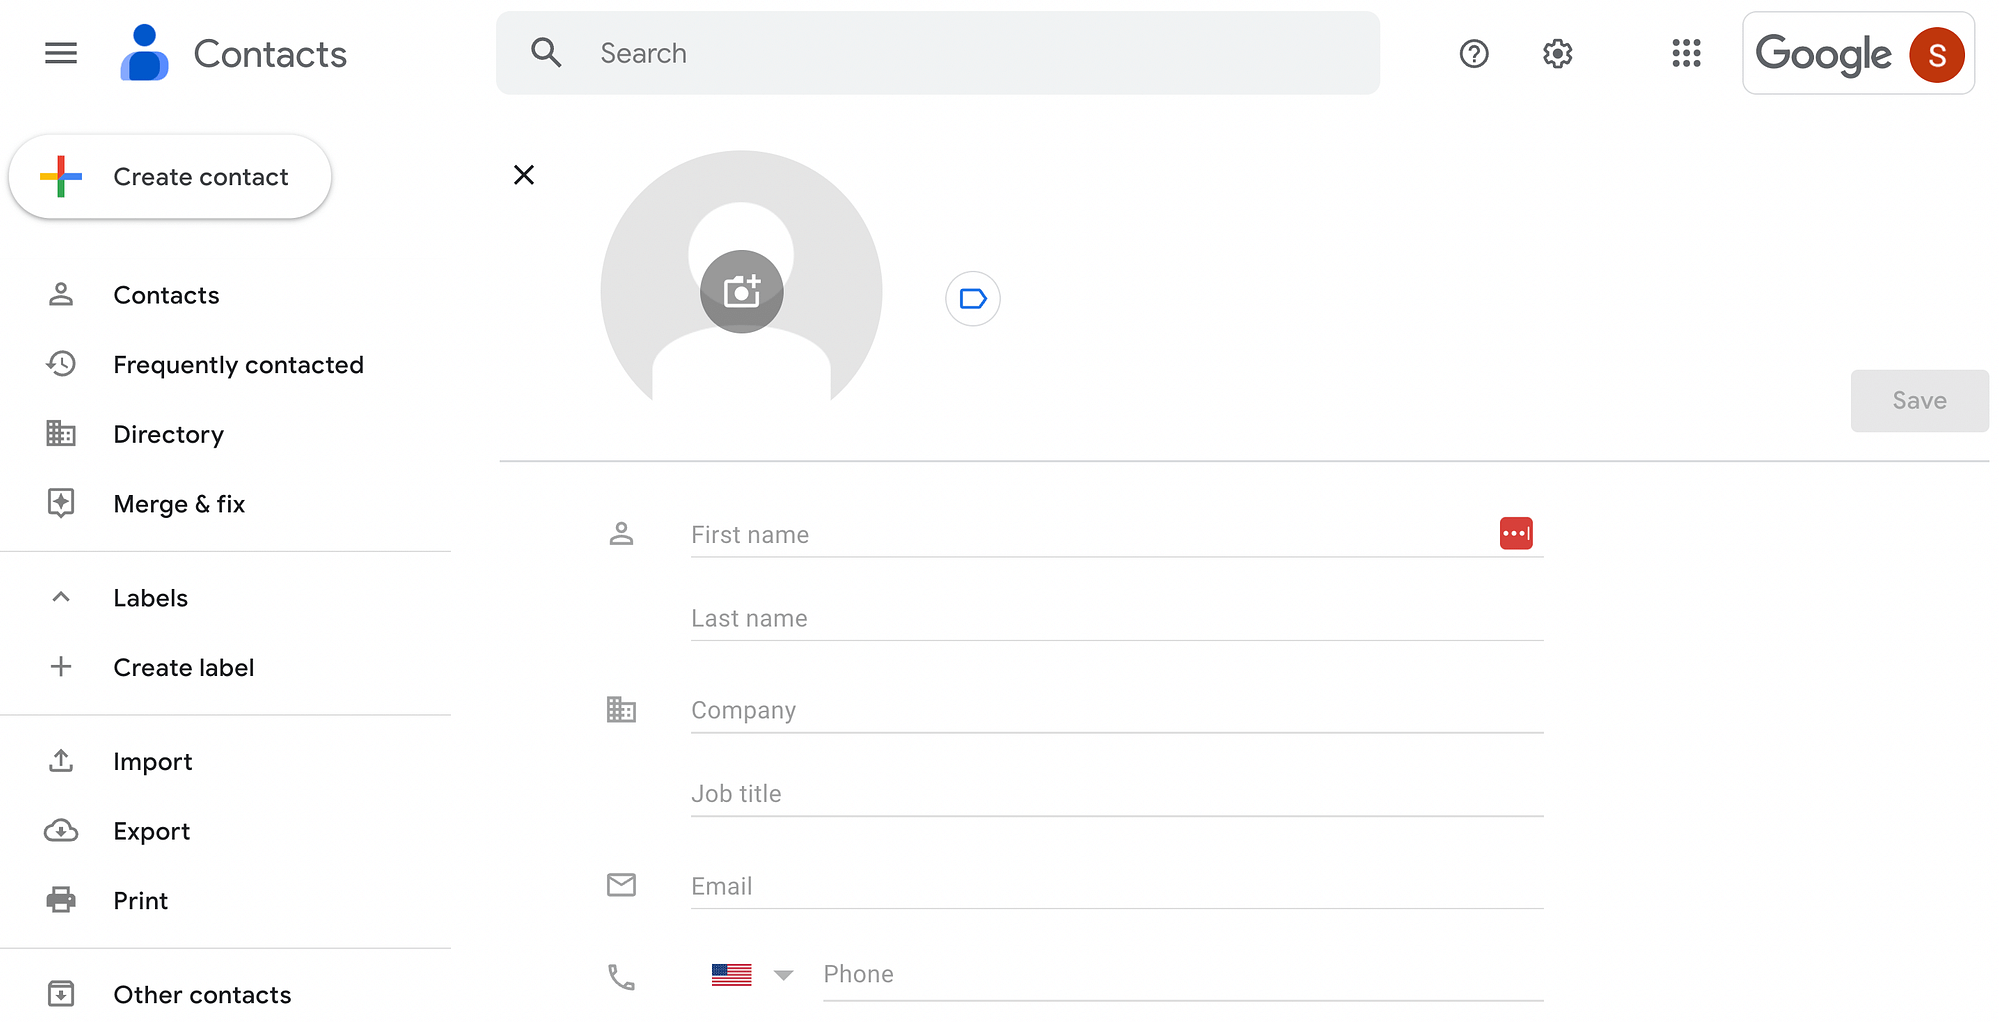 Google contact information page.